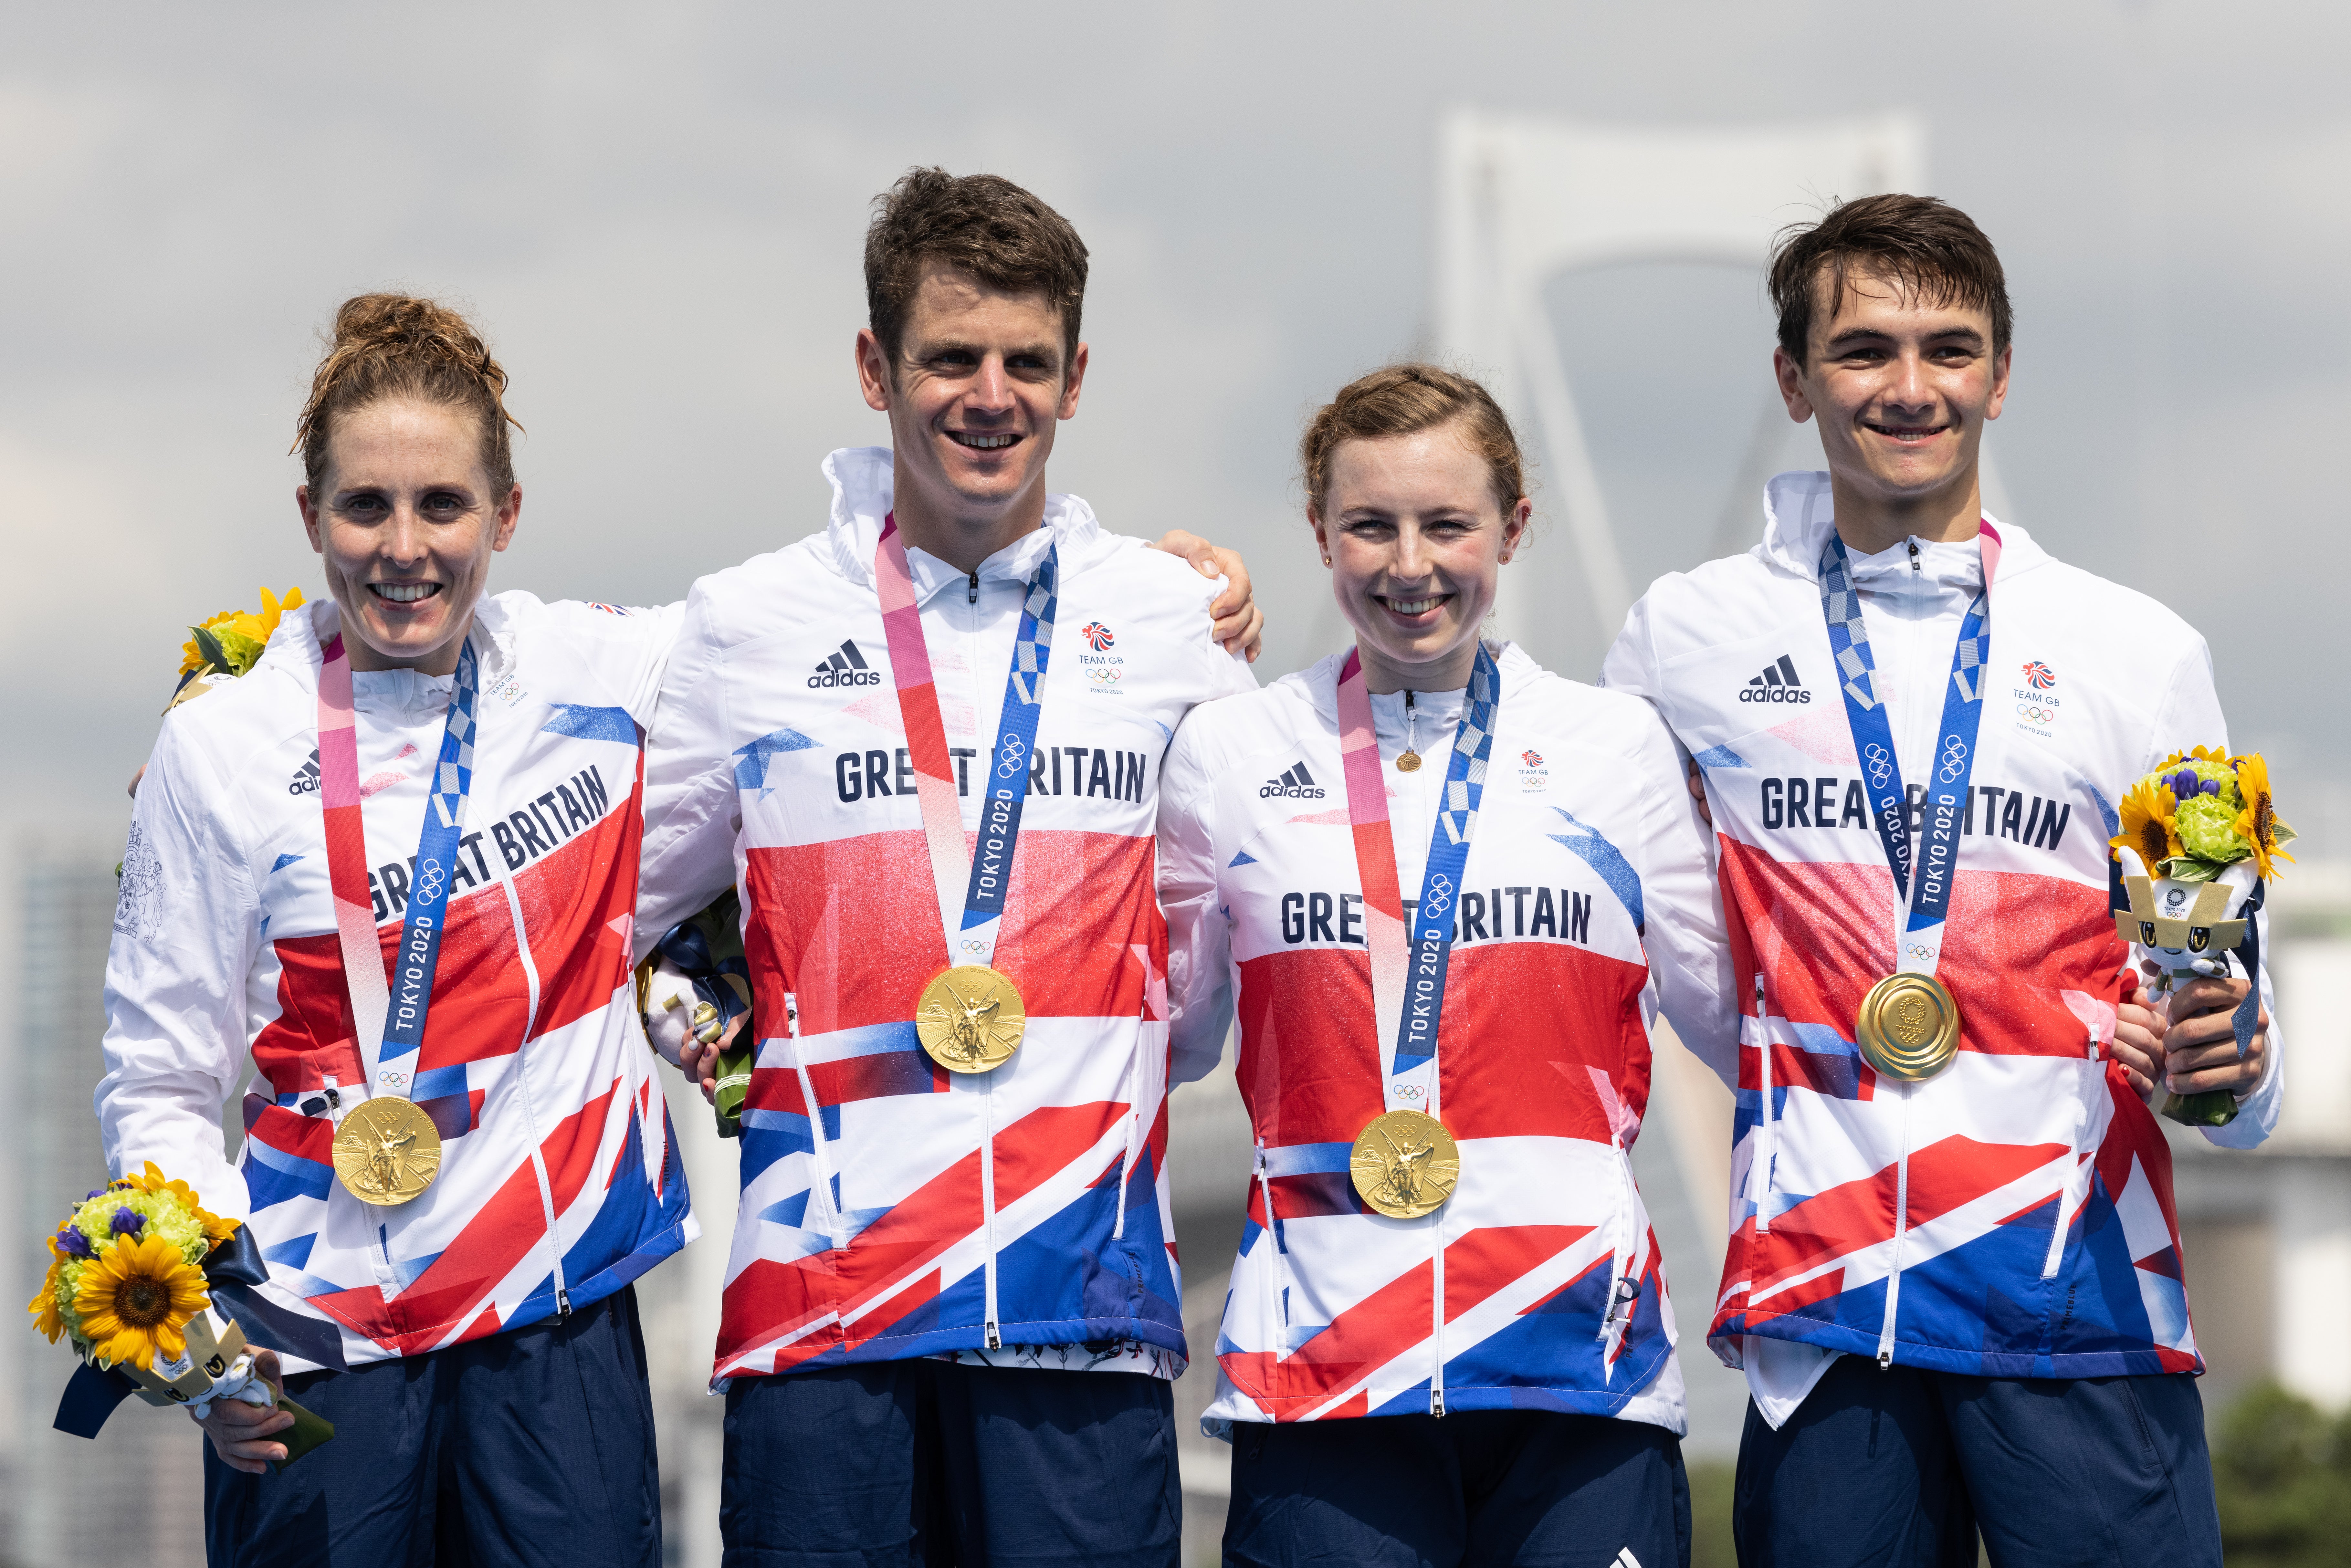 The British relay team finished 14 seconds ahead of the United States in second place